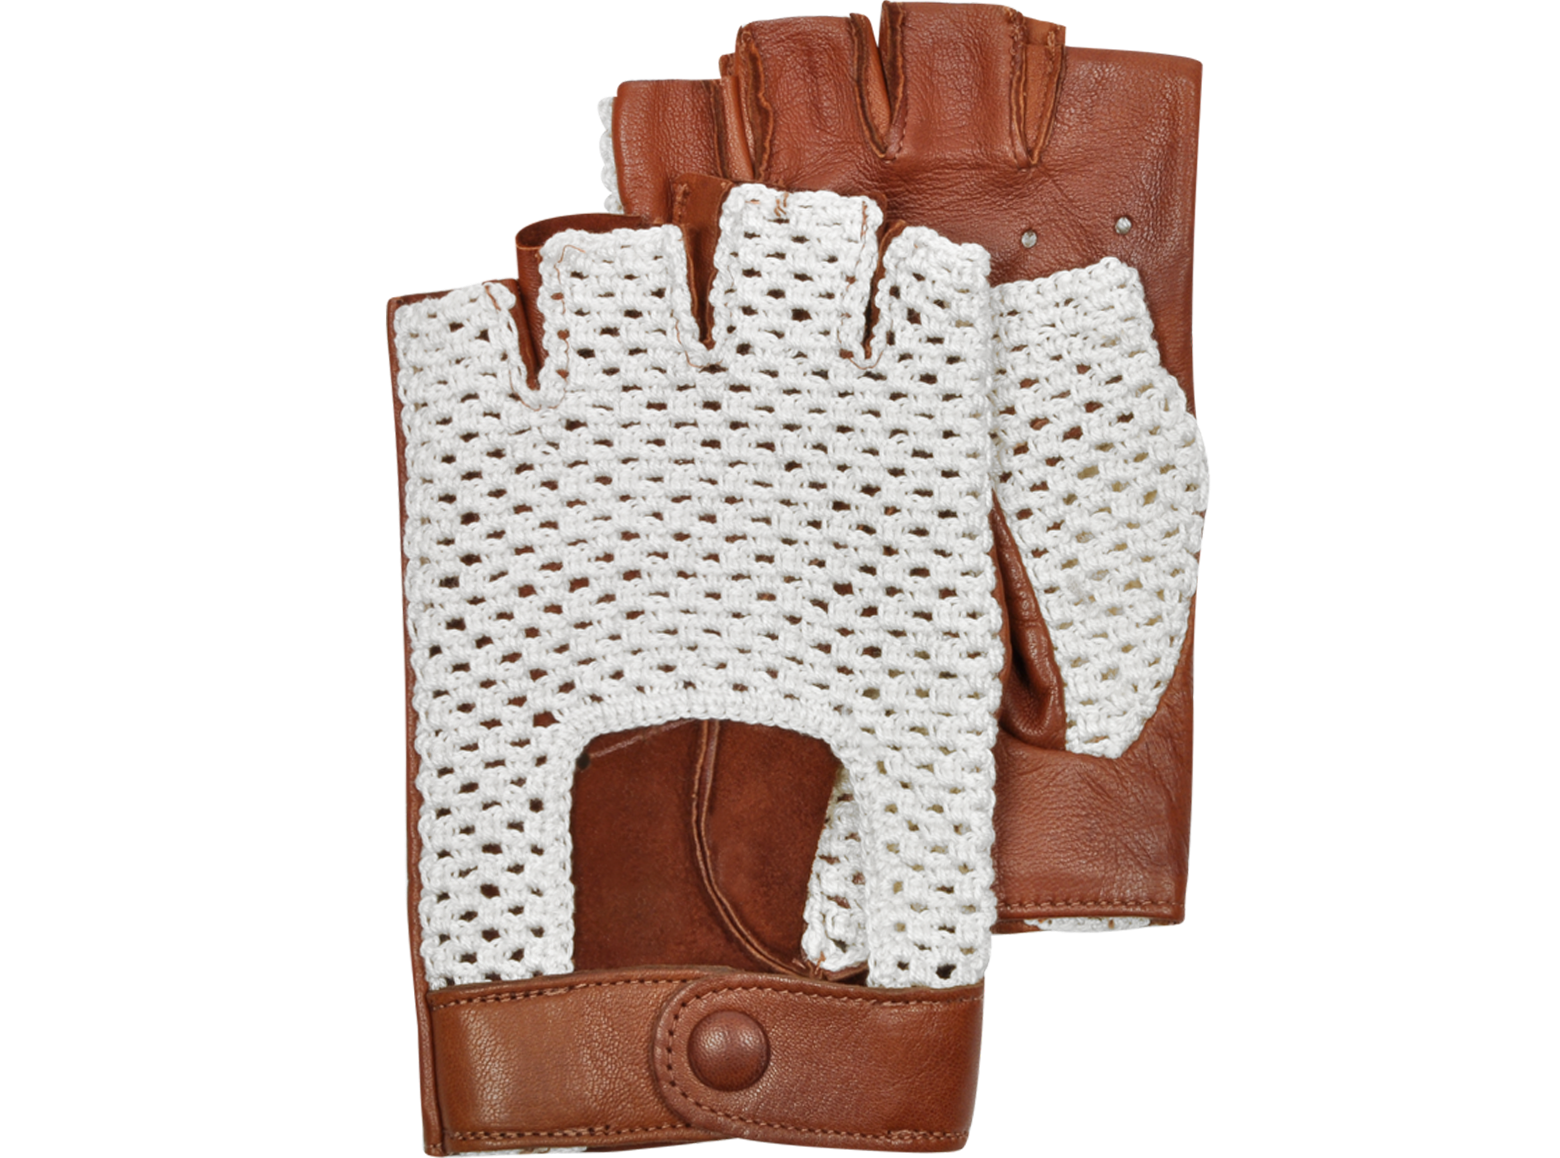 Forzieri Brown Leather and Cotton Men's Driving Gloves S, 8